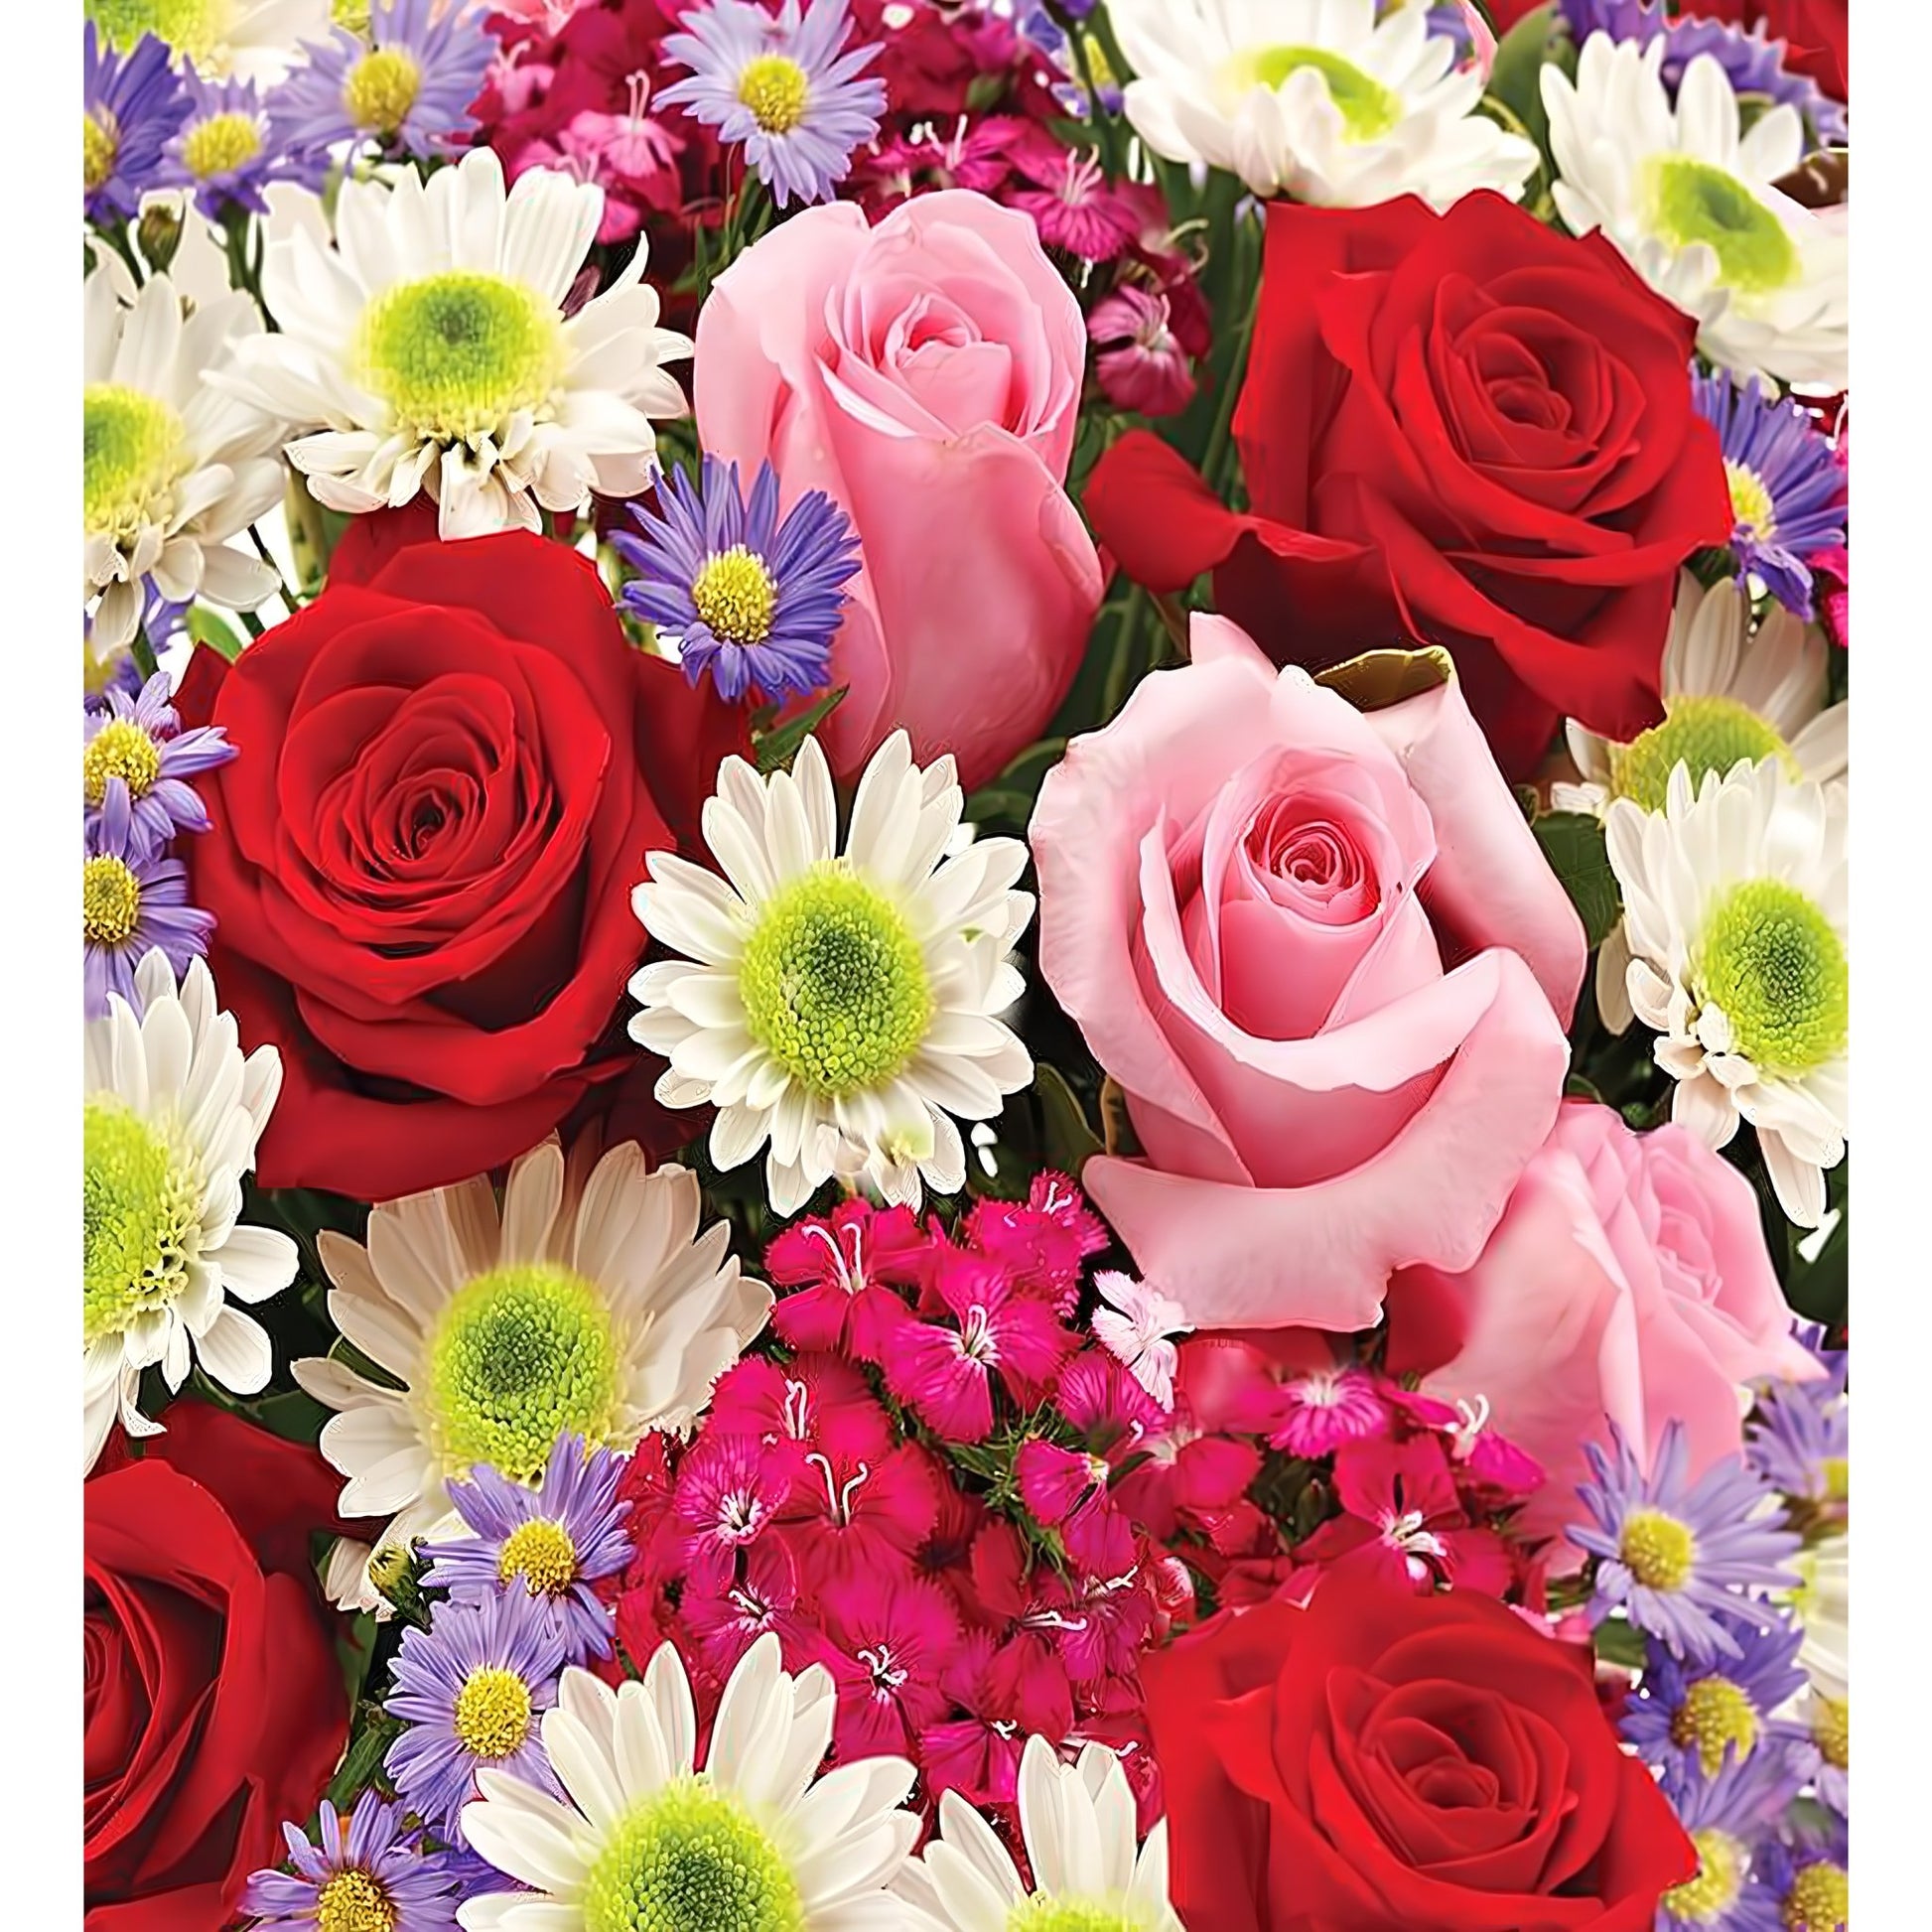 Florist Choice - Occasions > Anniversary - Queens Flower Delivery